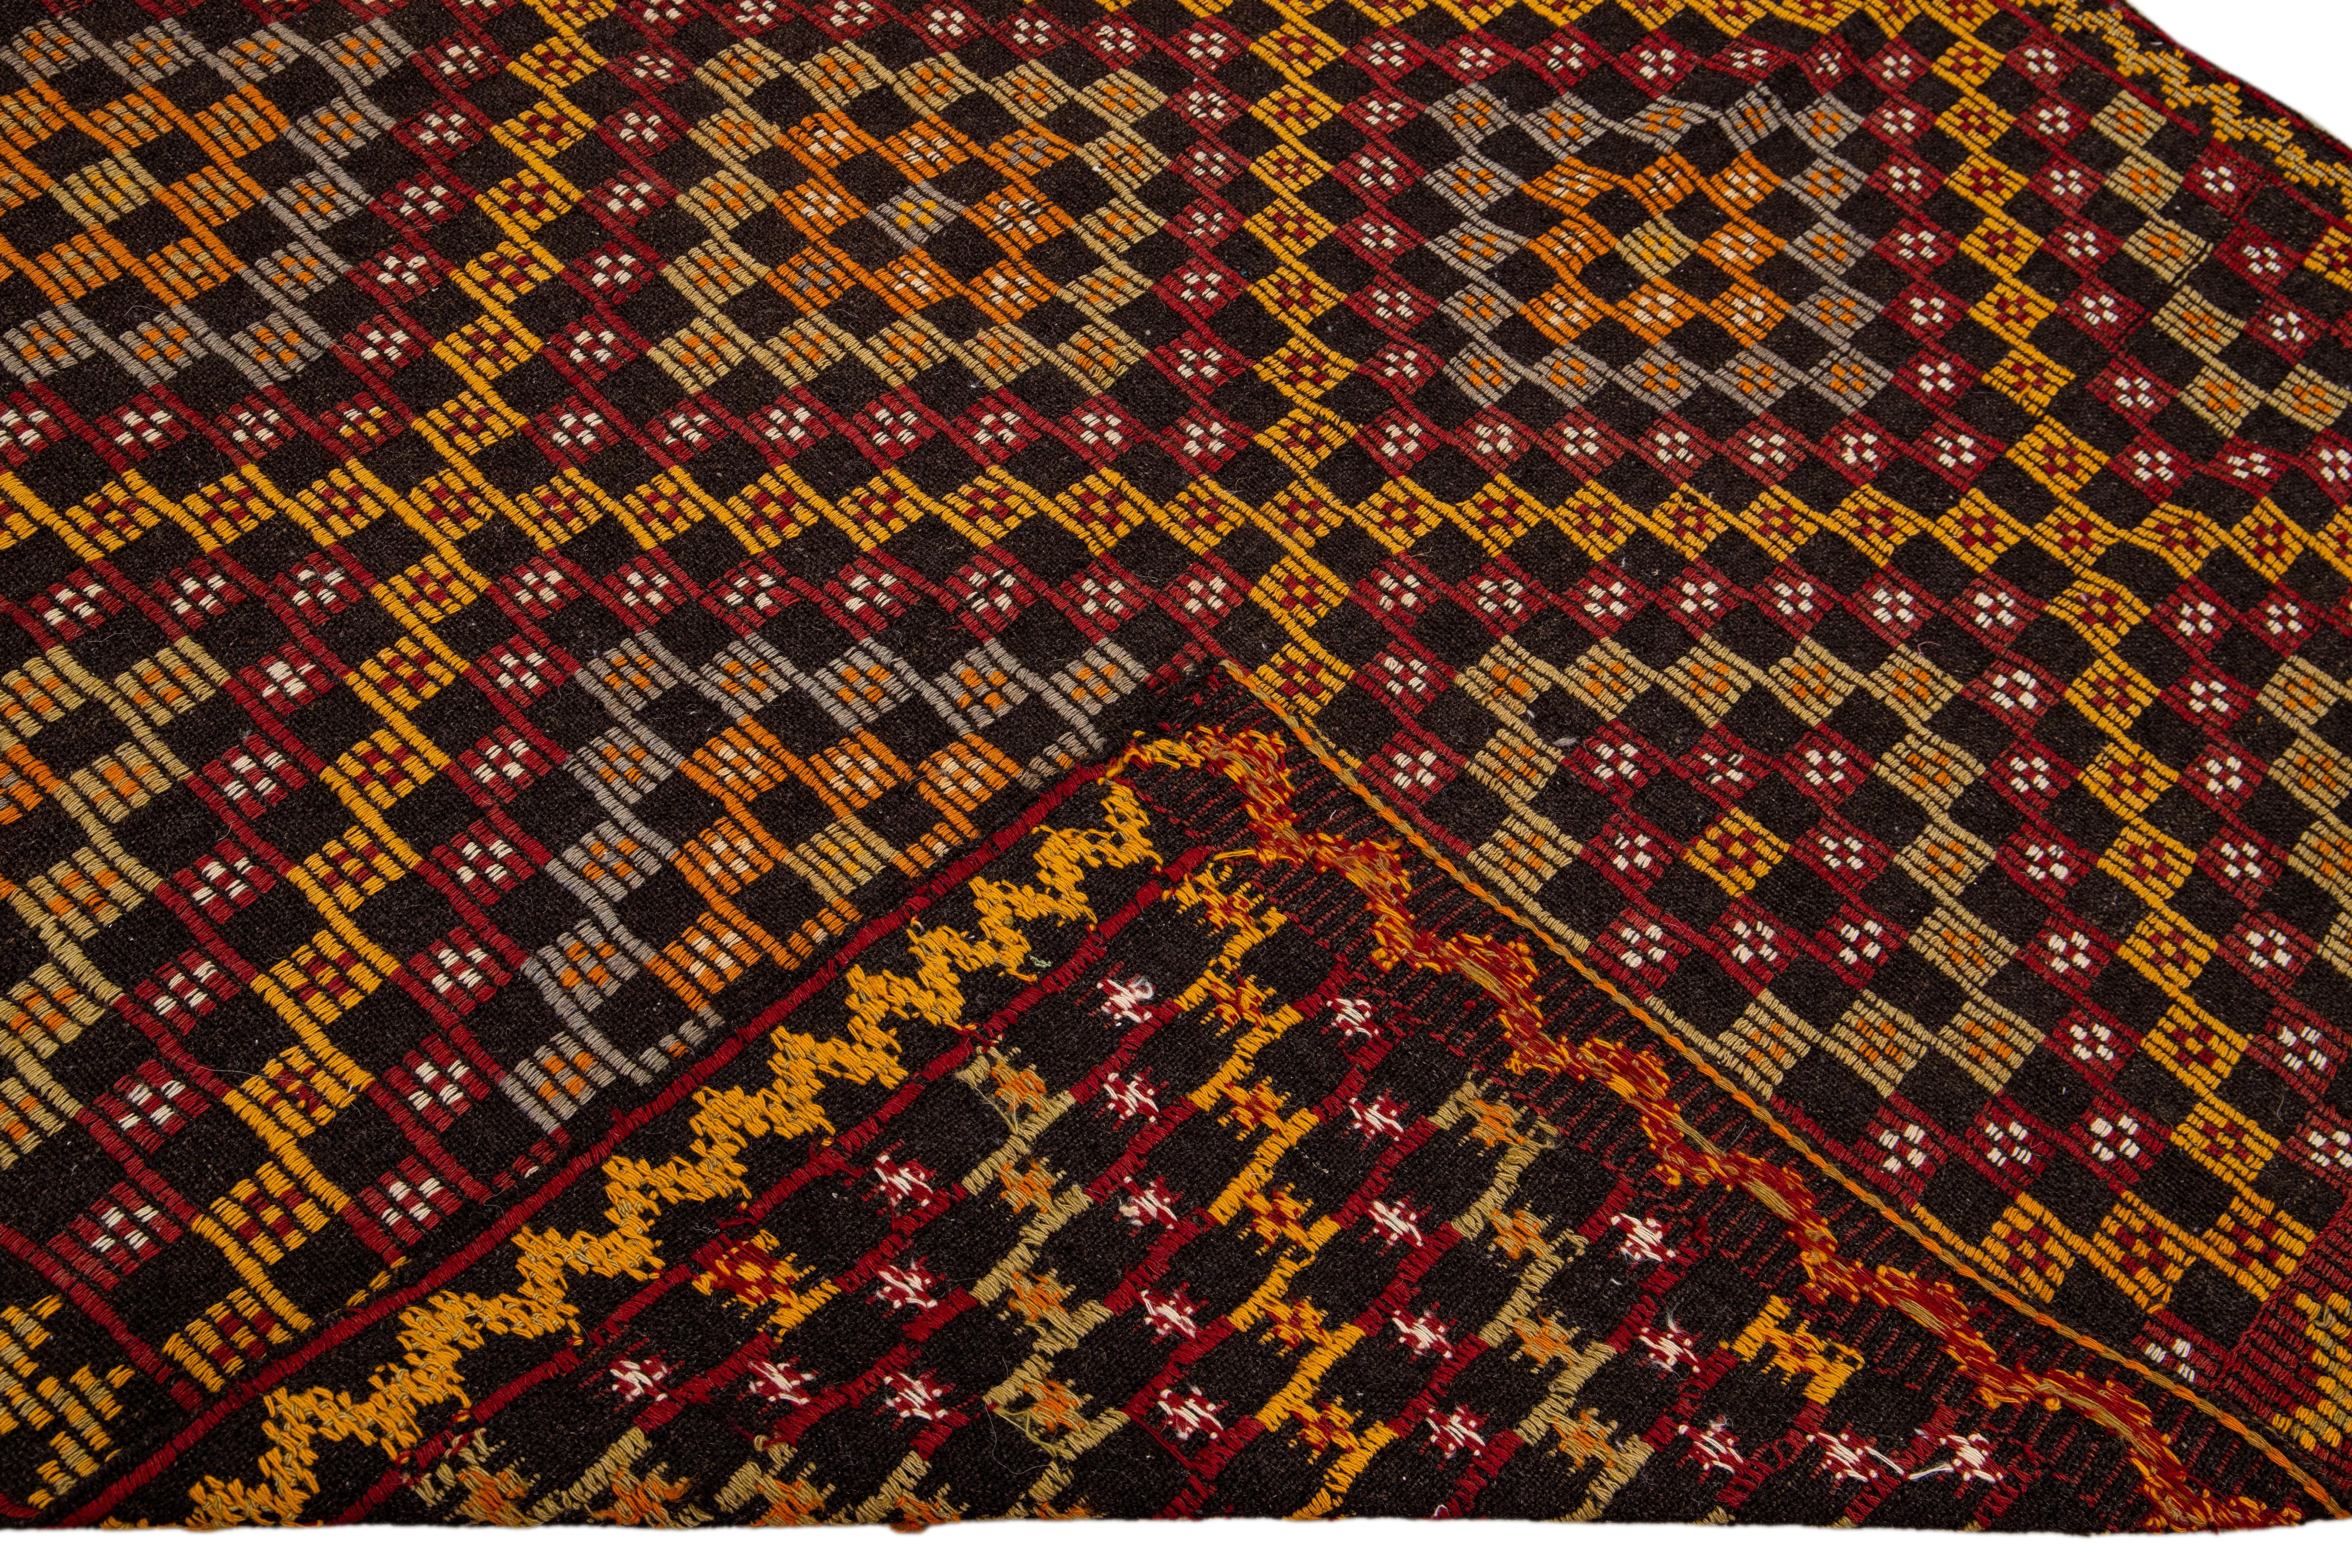 Beautiful vintage Soumak hand-knotted wool rug with a brown field. This piece has yellow, red, orange, and gray accents in a gorgeous all-over geometric medallion motif design.

This rug measures 5'6